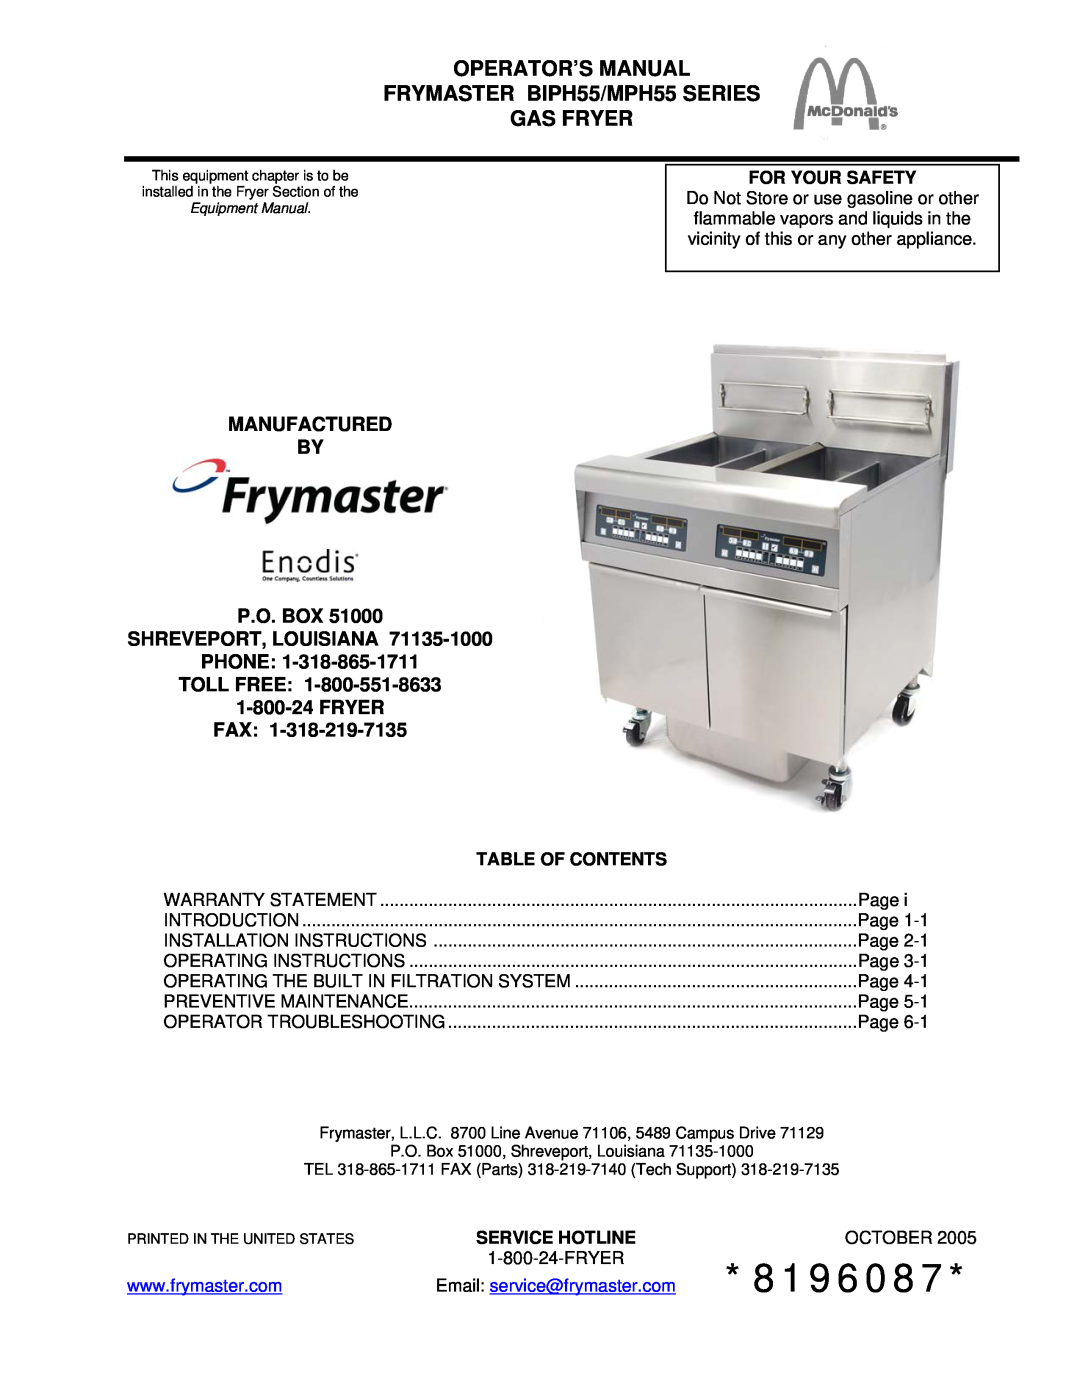 Frymaster BIPH55, MPH55 warranty 8196087, Manufactured By P.O. Box Shreveport, Louisiana Phone Toll Free, Fryer Fax 